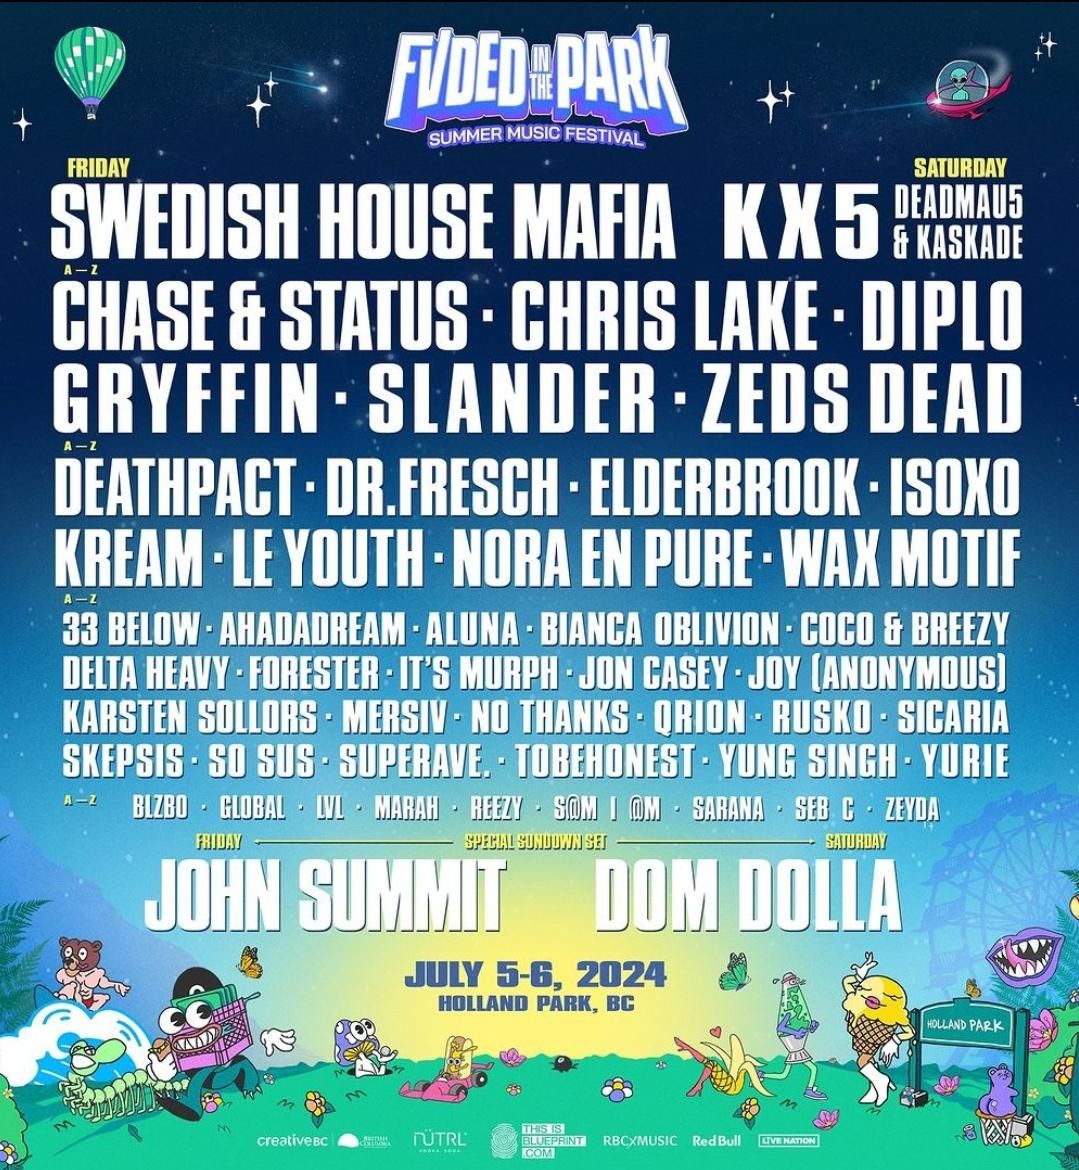 FVDED in the Park (2 Day Pass) (16+)